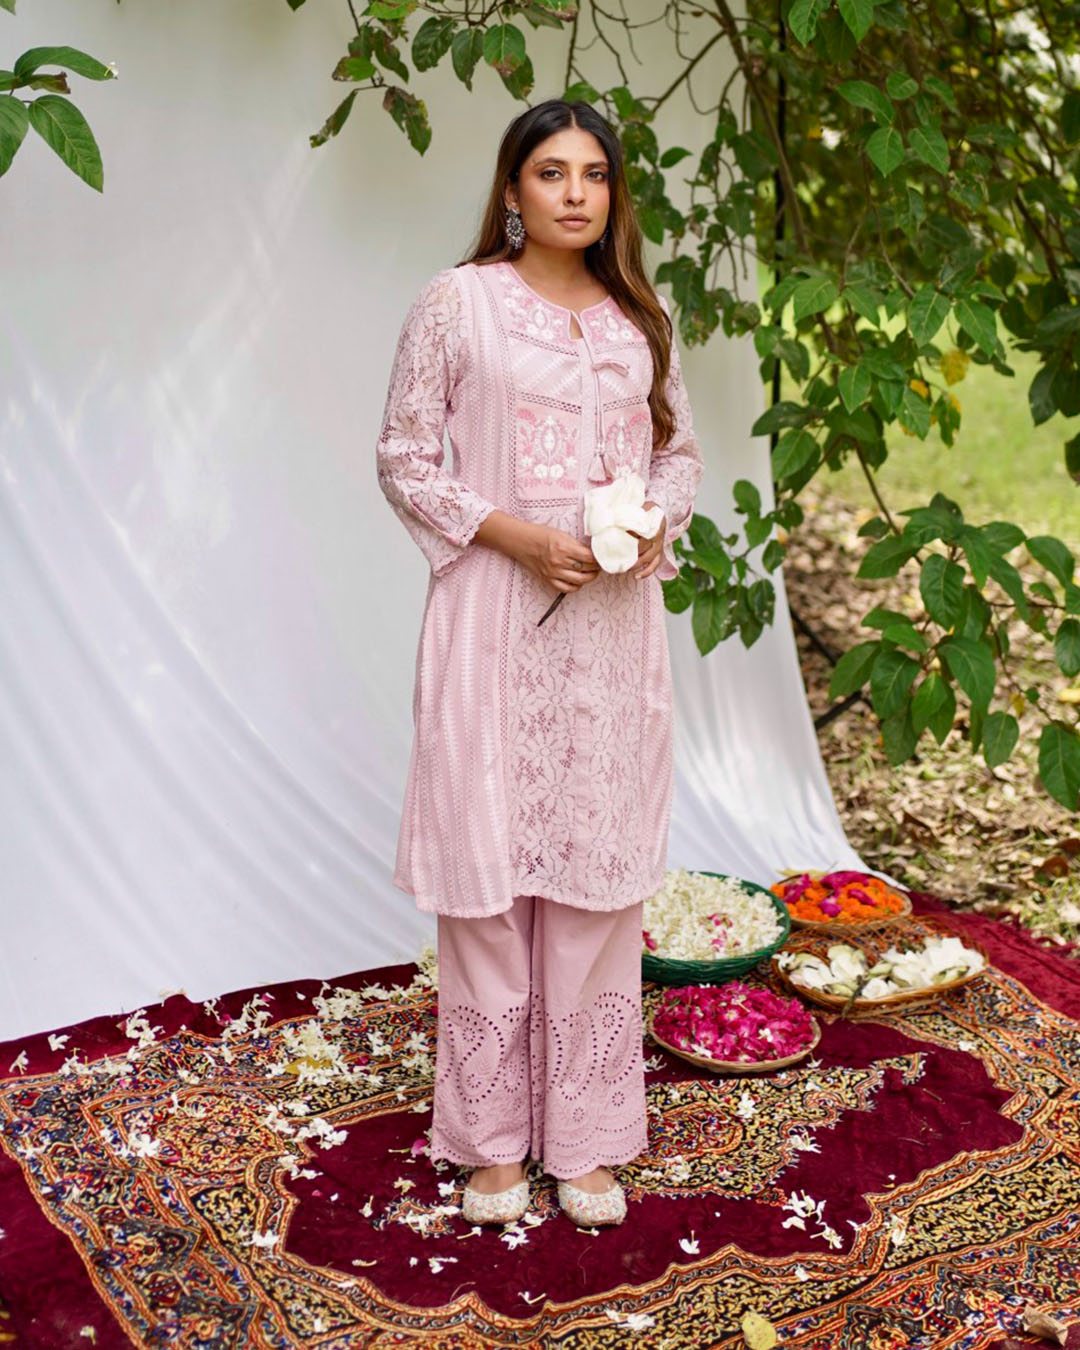 Arushi Tripathi carrying a beautiful light pink color co-ord set from Lakshita